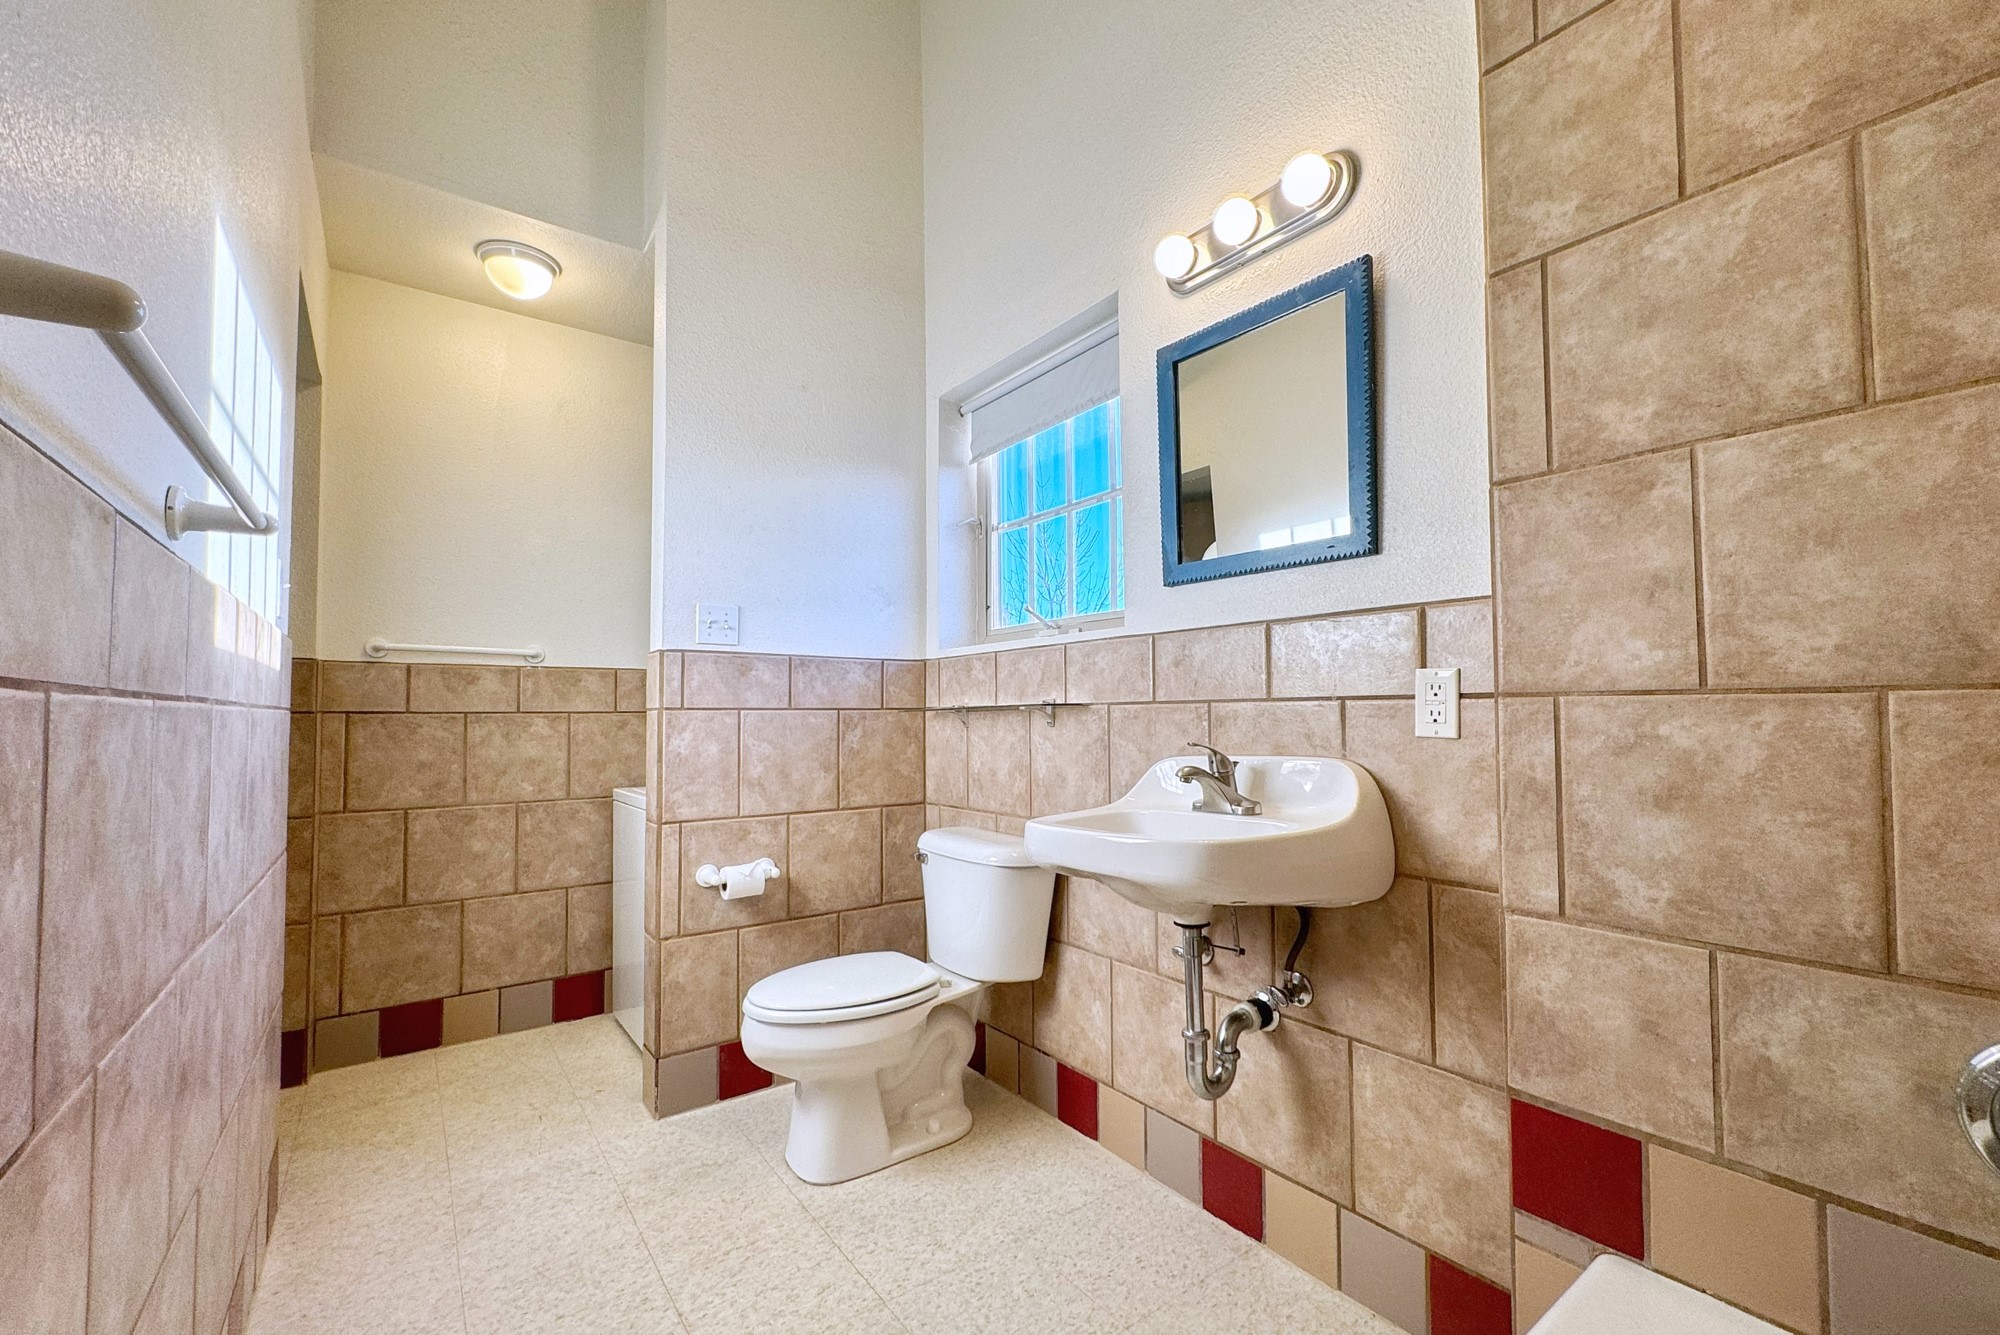 1918 Hopewell C, Santa Fe, New Mexico 87505, 2 Bedrooms Bedrooms, ,2 BathroomsBathrooms,Residential,For Sale,1918 Hopewell C,202400578